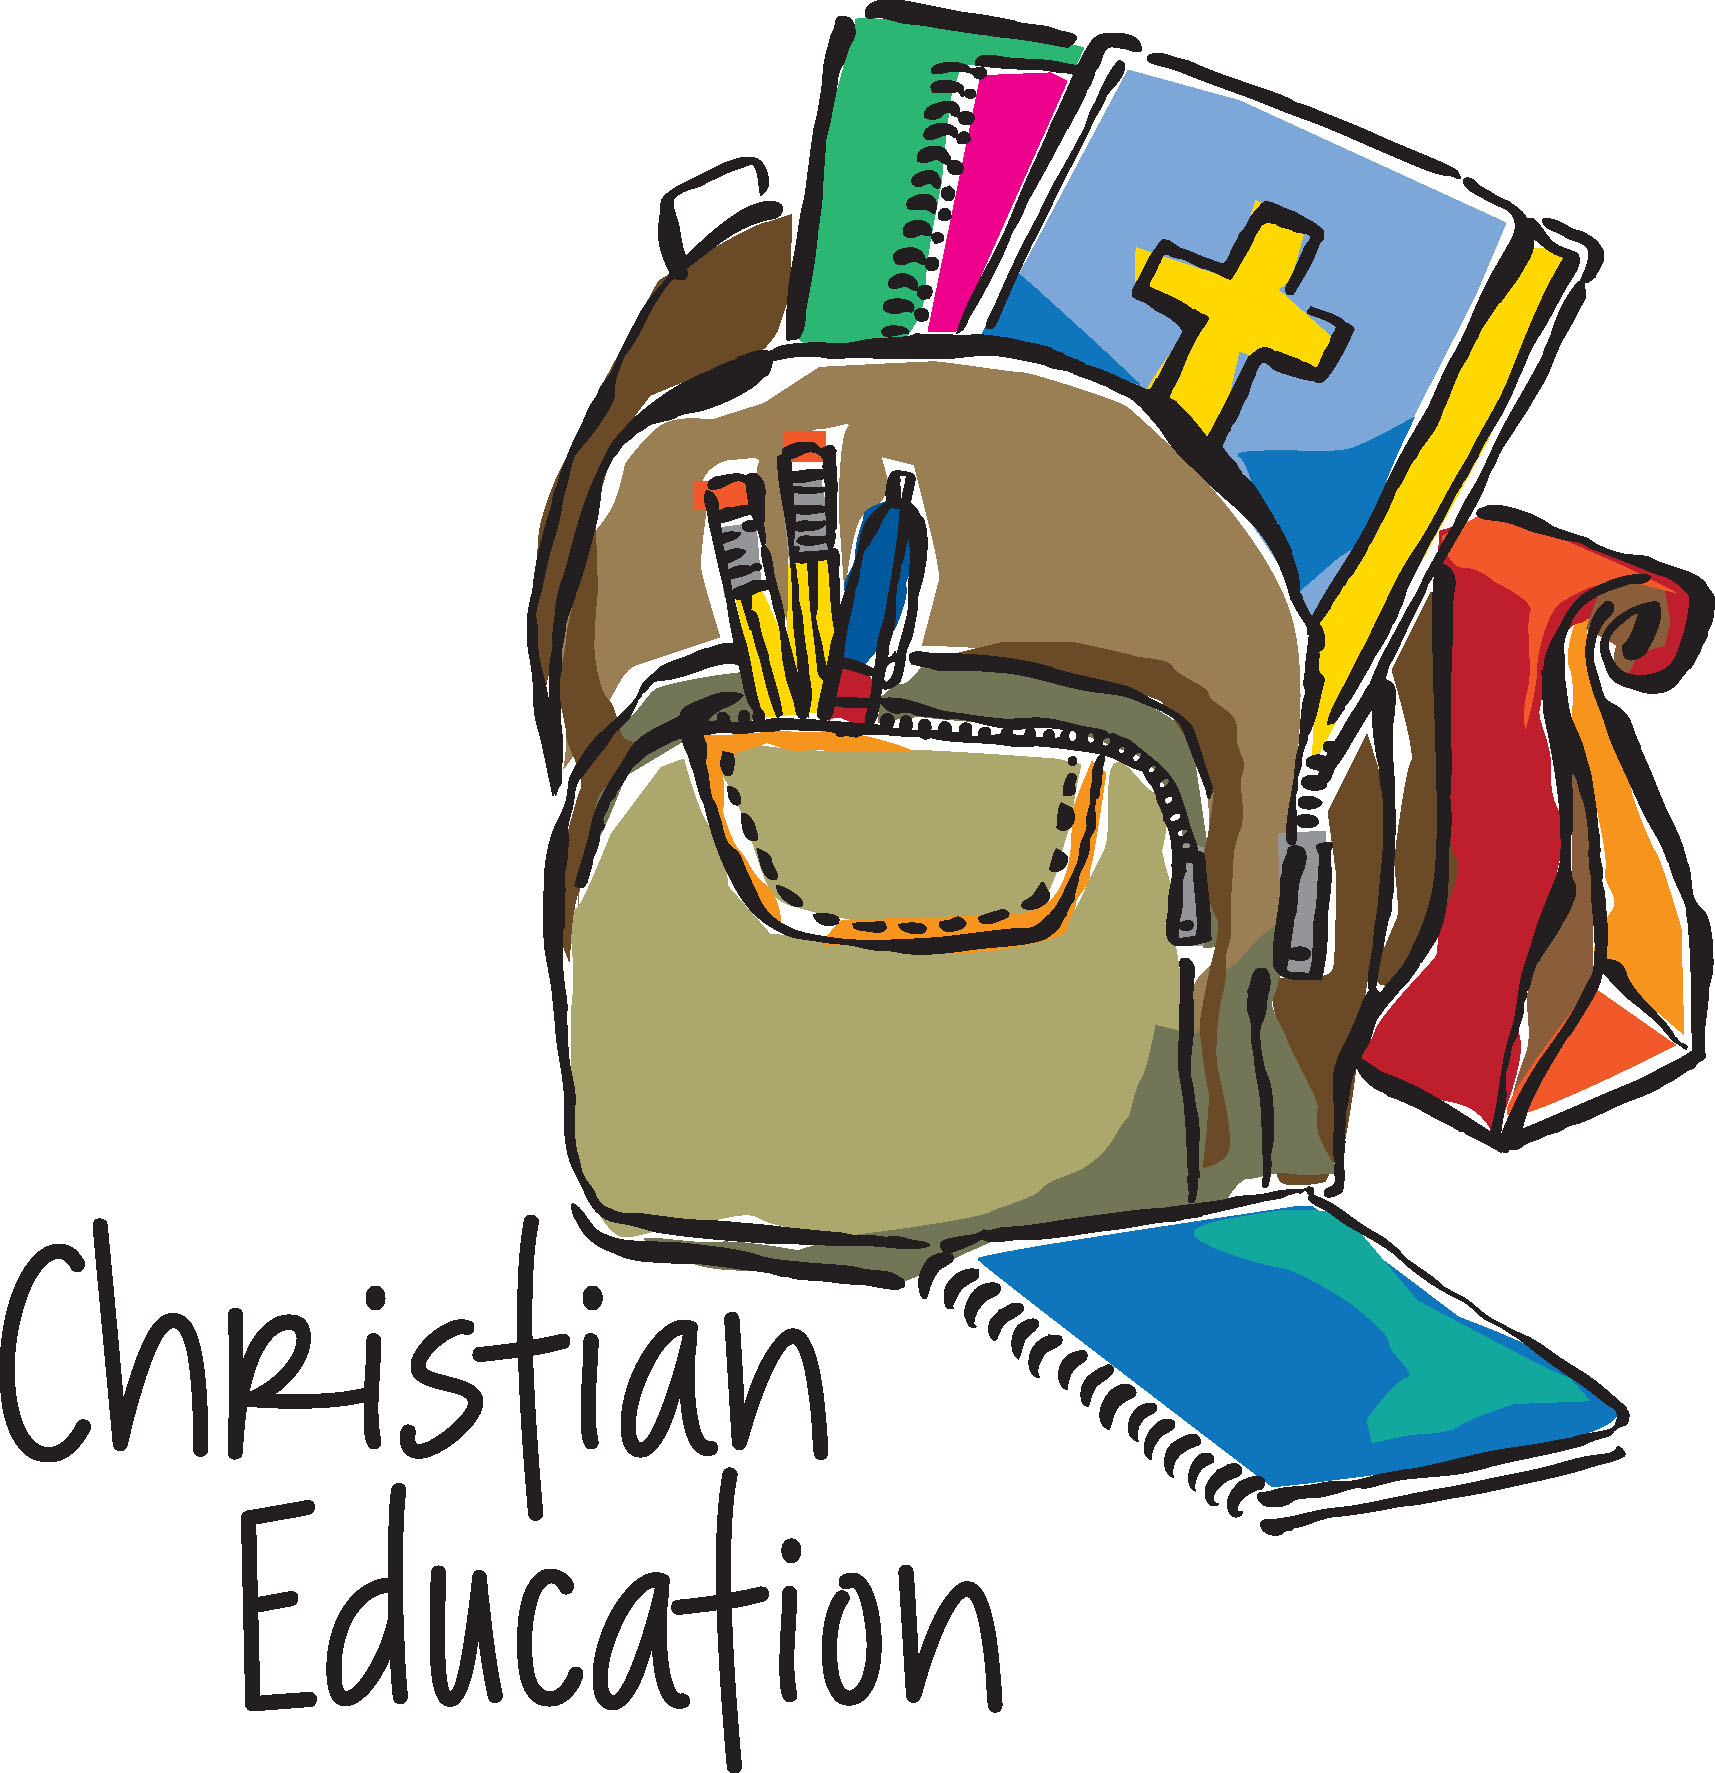 free education clipart download - photo #23